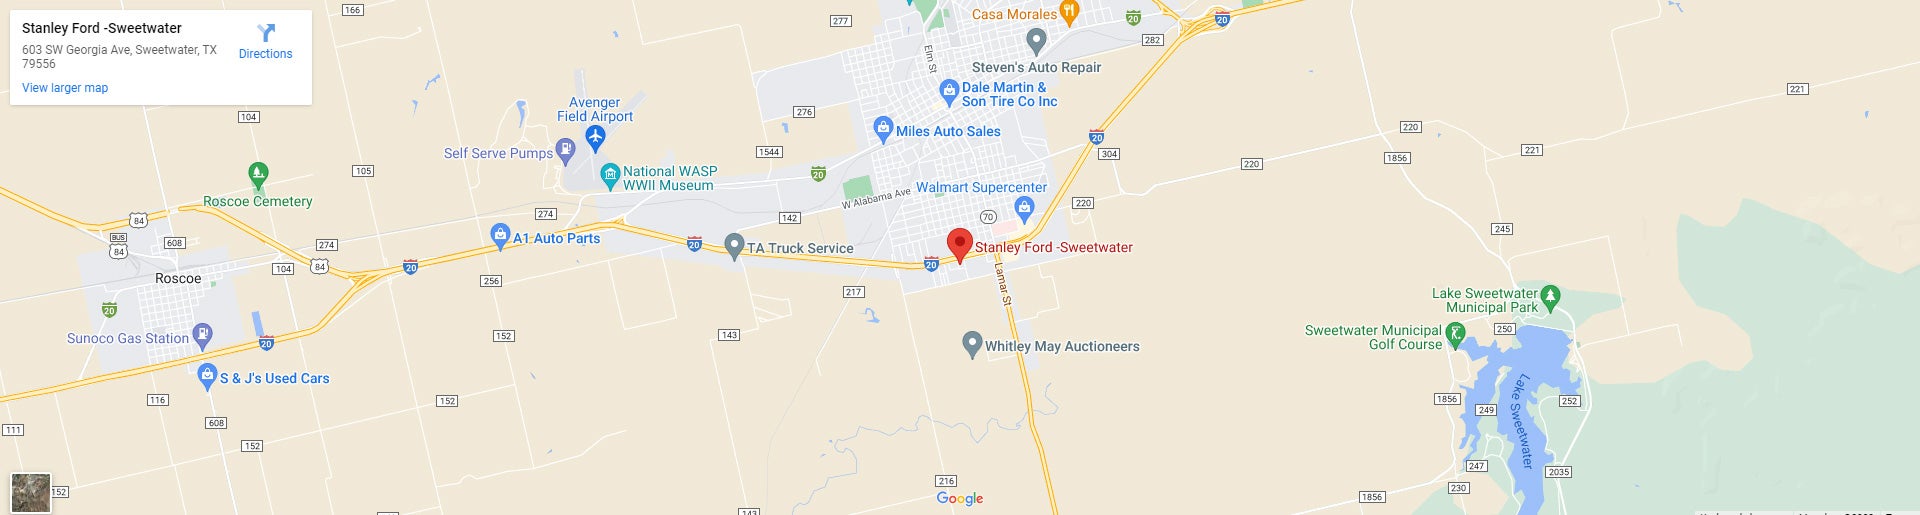 Stanley Ford Sweetwater location Google Maps image